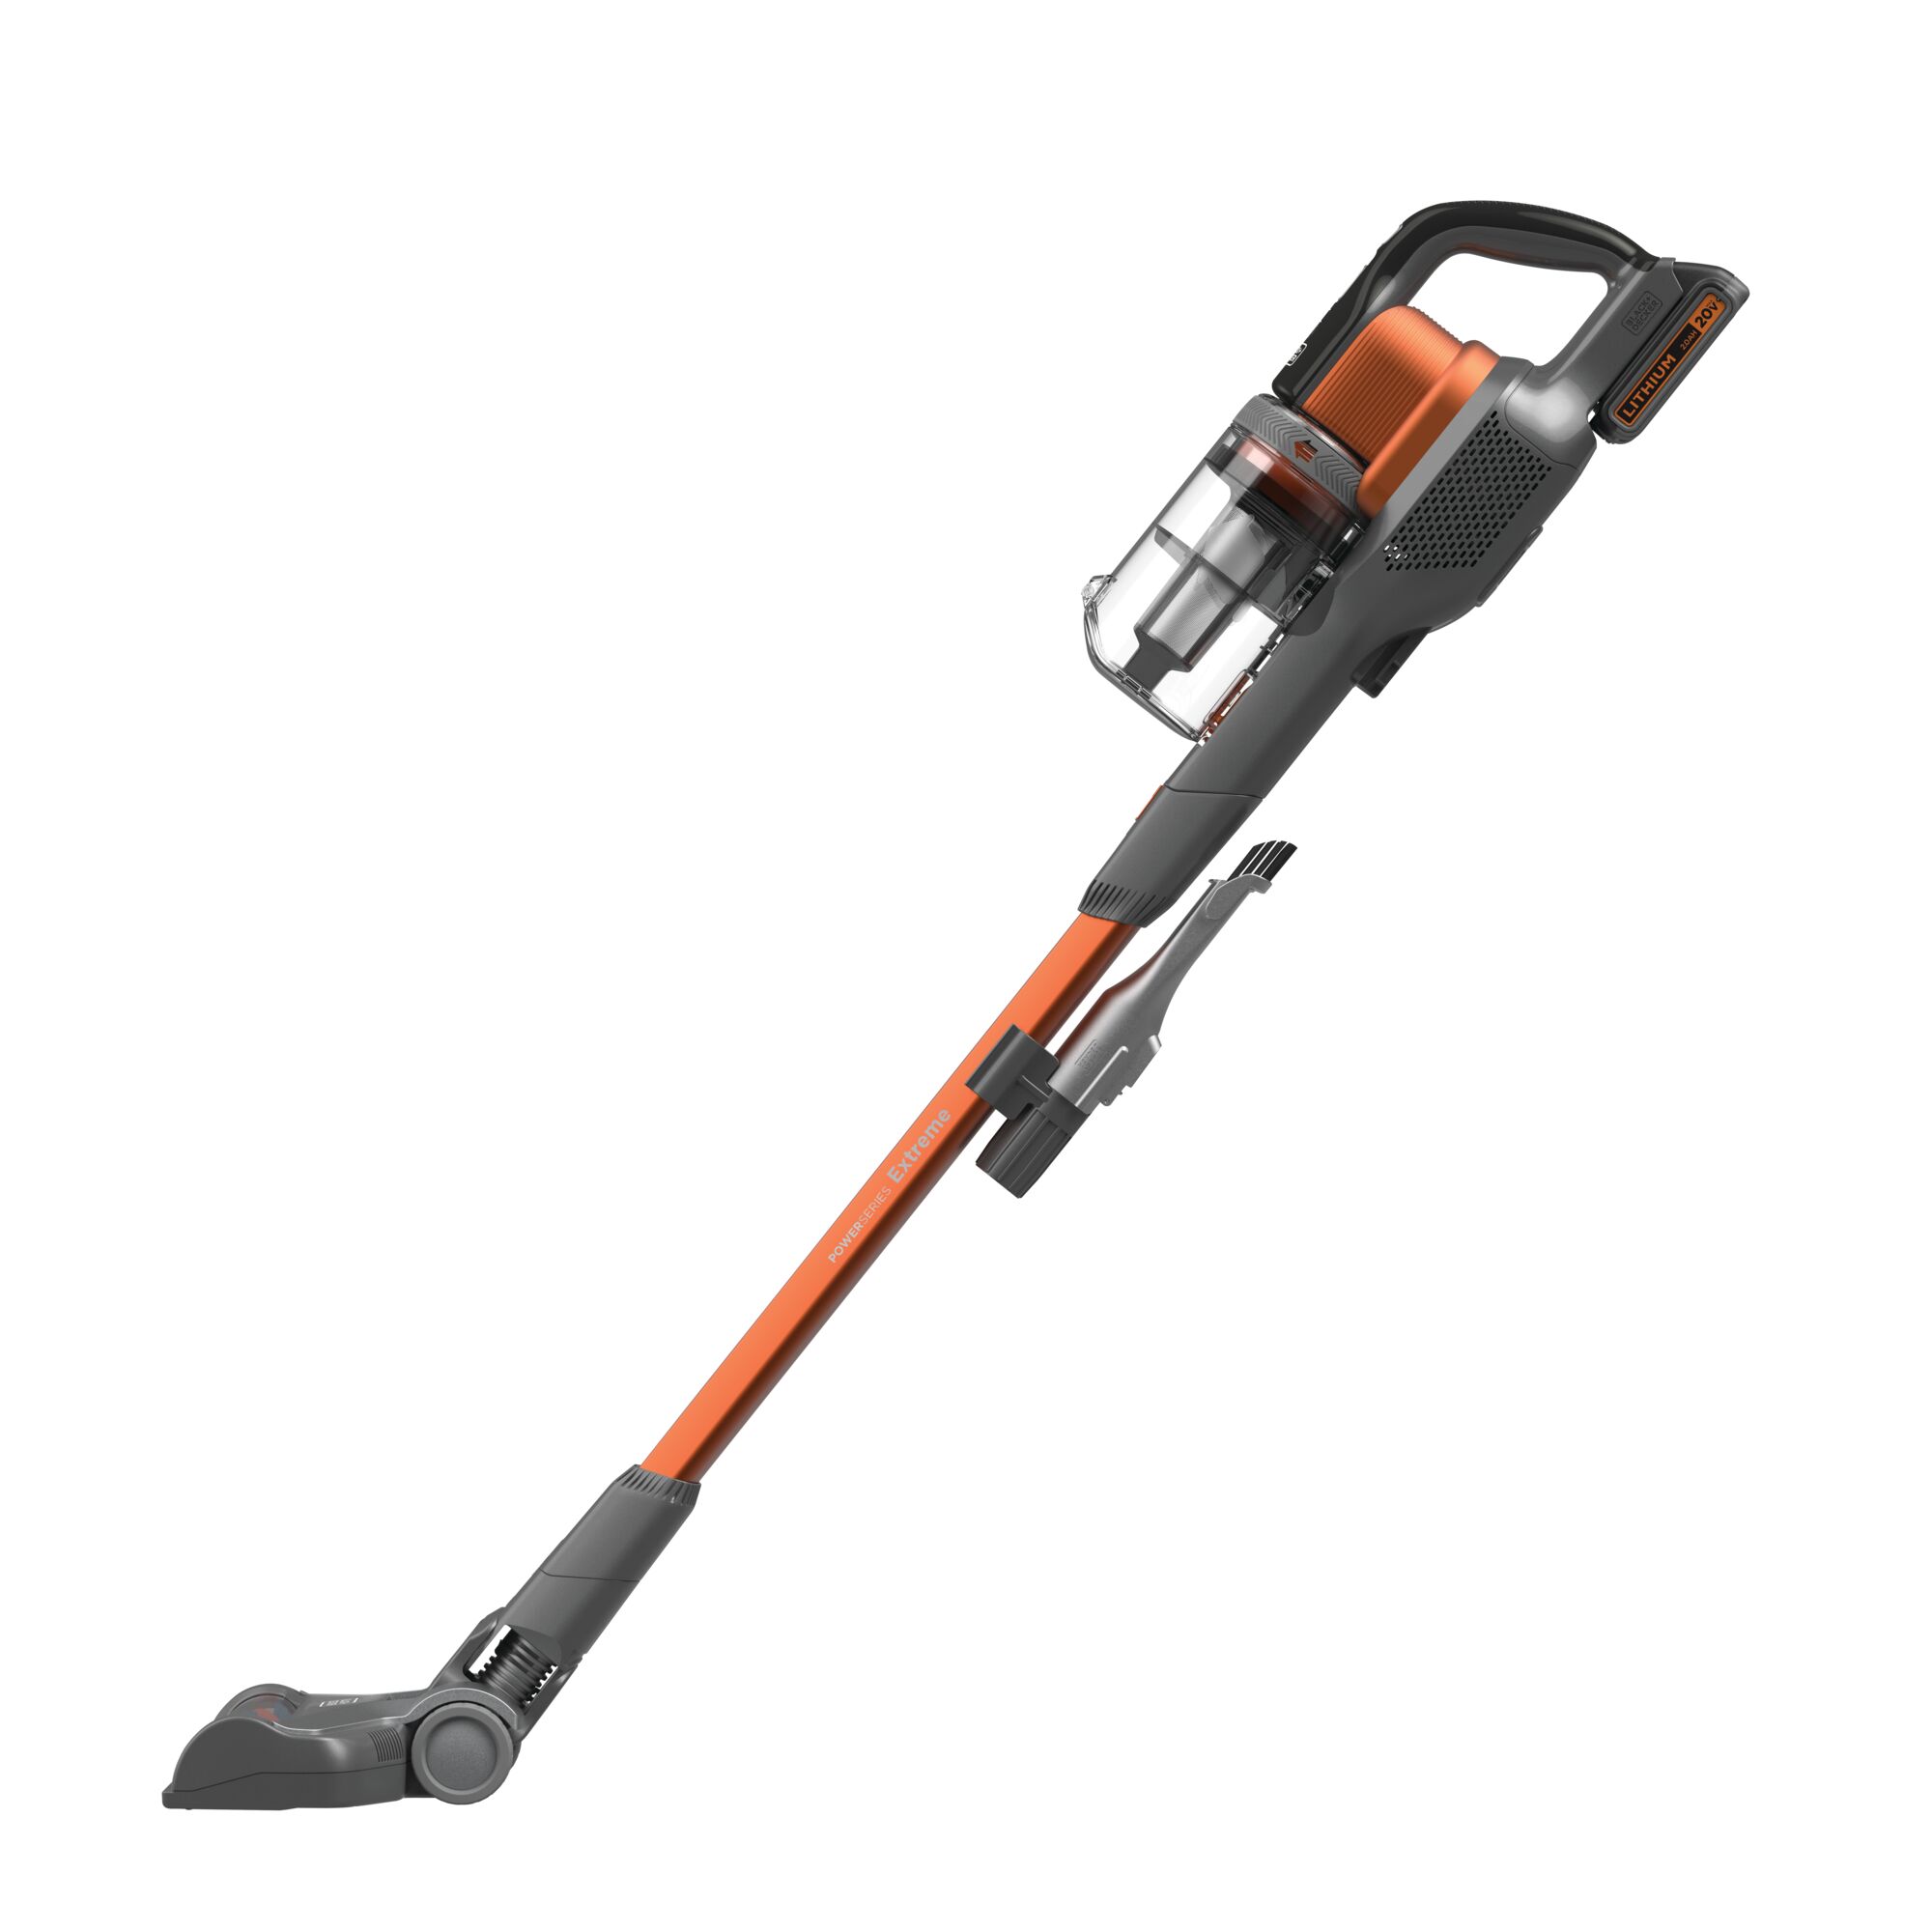 Profile of POWERSERIES Extreme cordless stick vacuum cleaner.\n